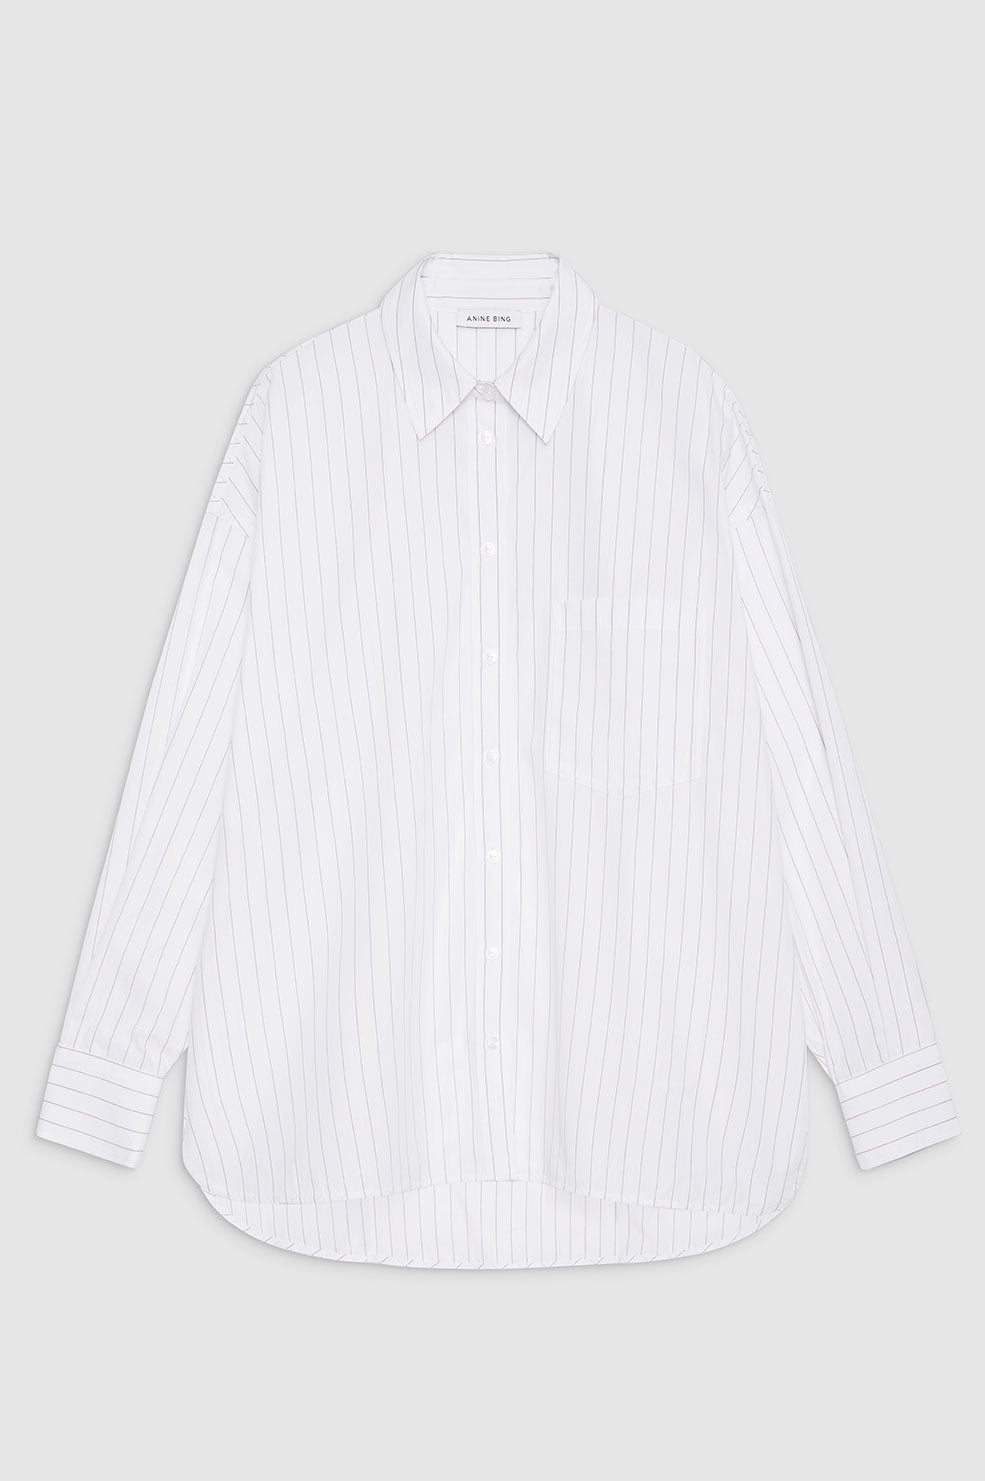 ANINE BING Chrissy Shirt - White And Taupe Stripe - Front View